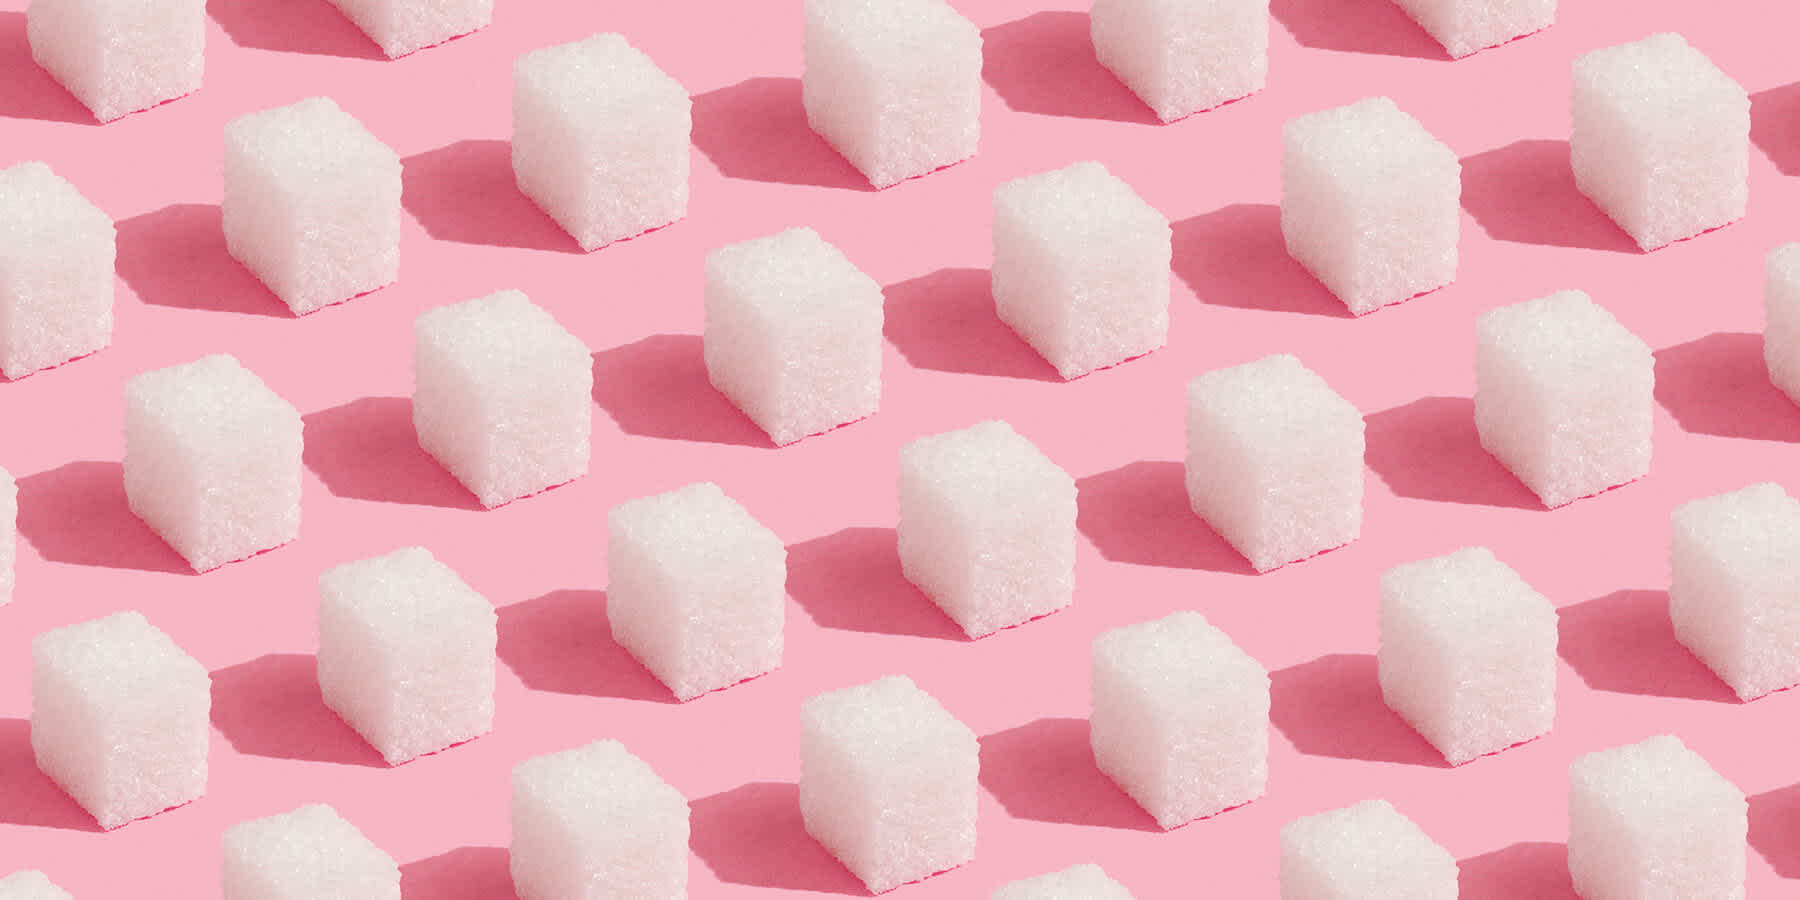 Cubes of sugar against a pink background to represent sugar that may contribute to inflammation